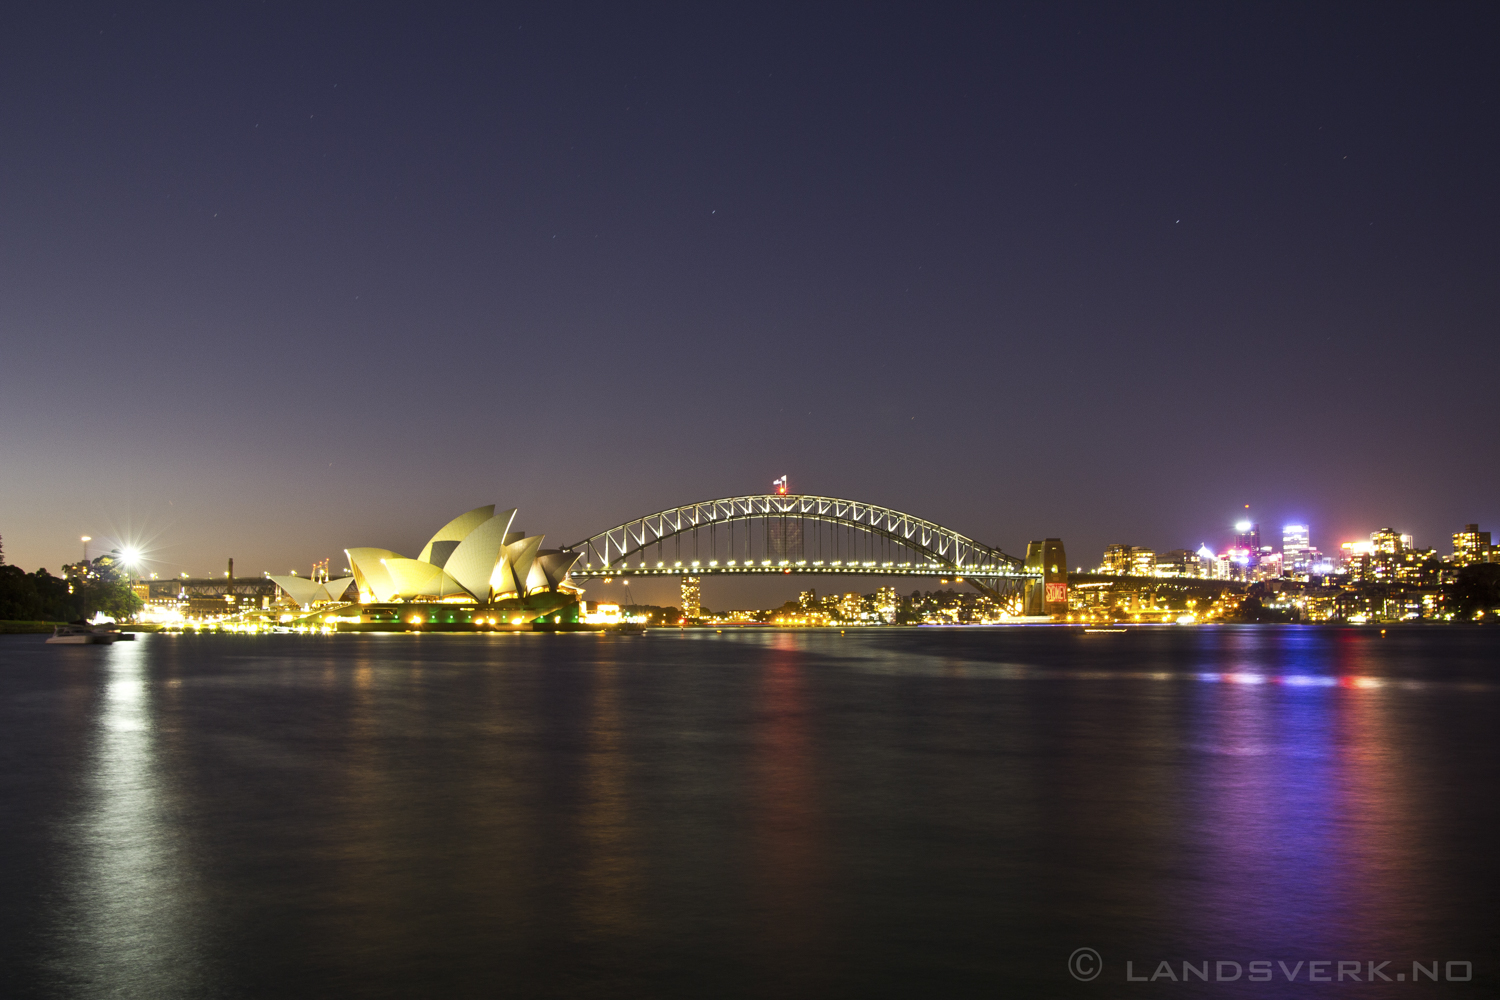 Sydney Harbor at night, New South Wales. 

(Canon EOS 550D / Sigma 18-50mm F2.8)